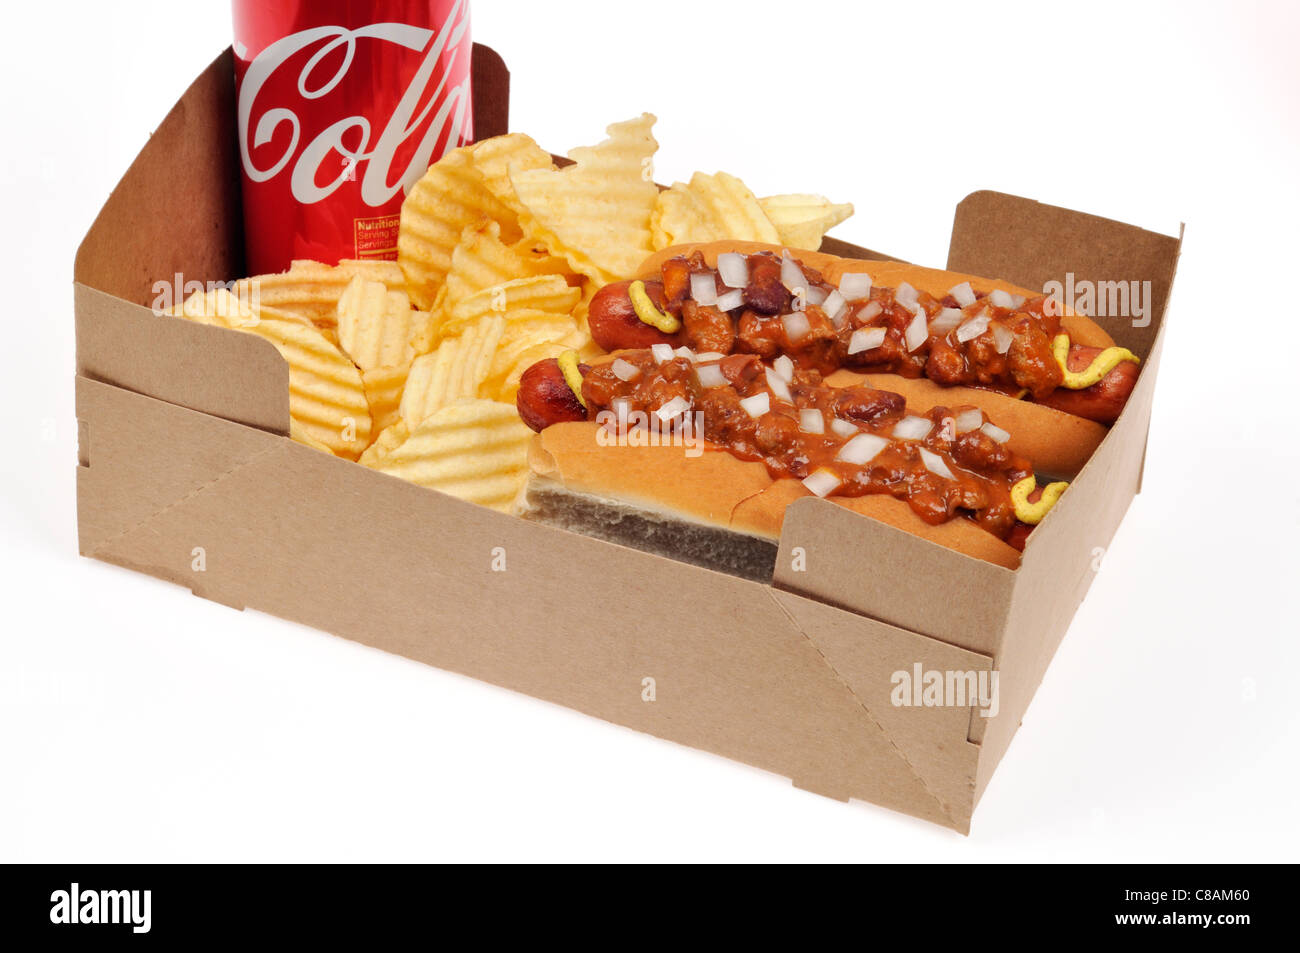 2 take-out Chili dogs with onions in bread rolls with a tin of coke and crisps on white background. Stock Photo